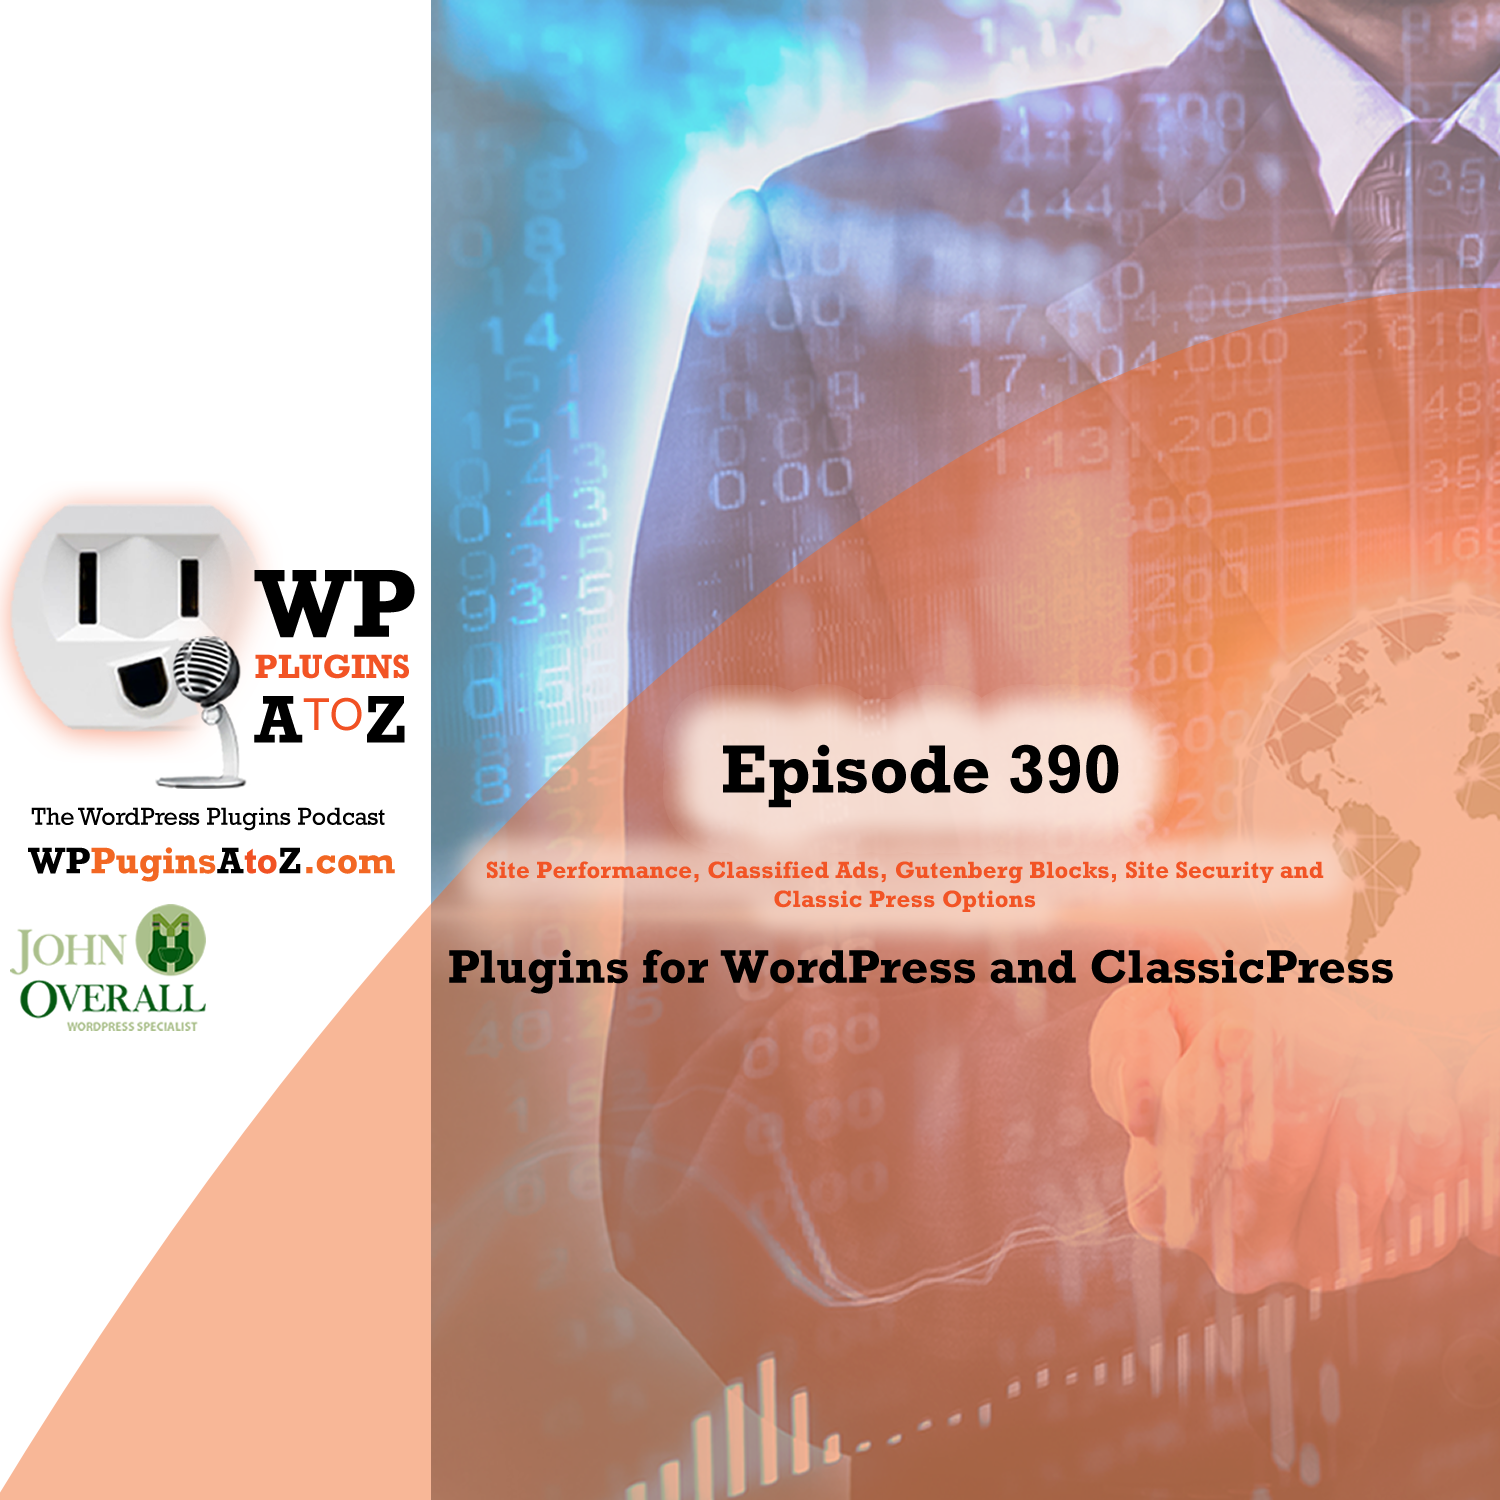 It's Episode 390 and I've got plugins for Site Performance, Classified Ads, Gutenberg Blocks, Site Security and Classic Press Options. It's all coming up on WordPress Plugins A-Z!